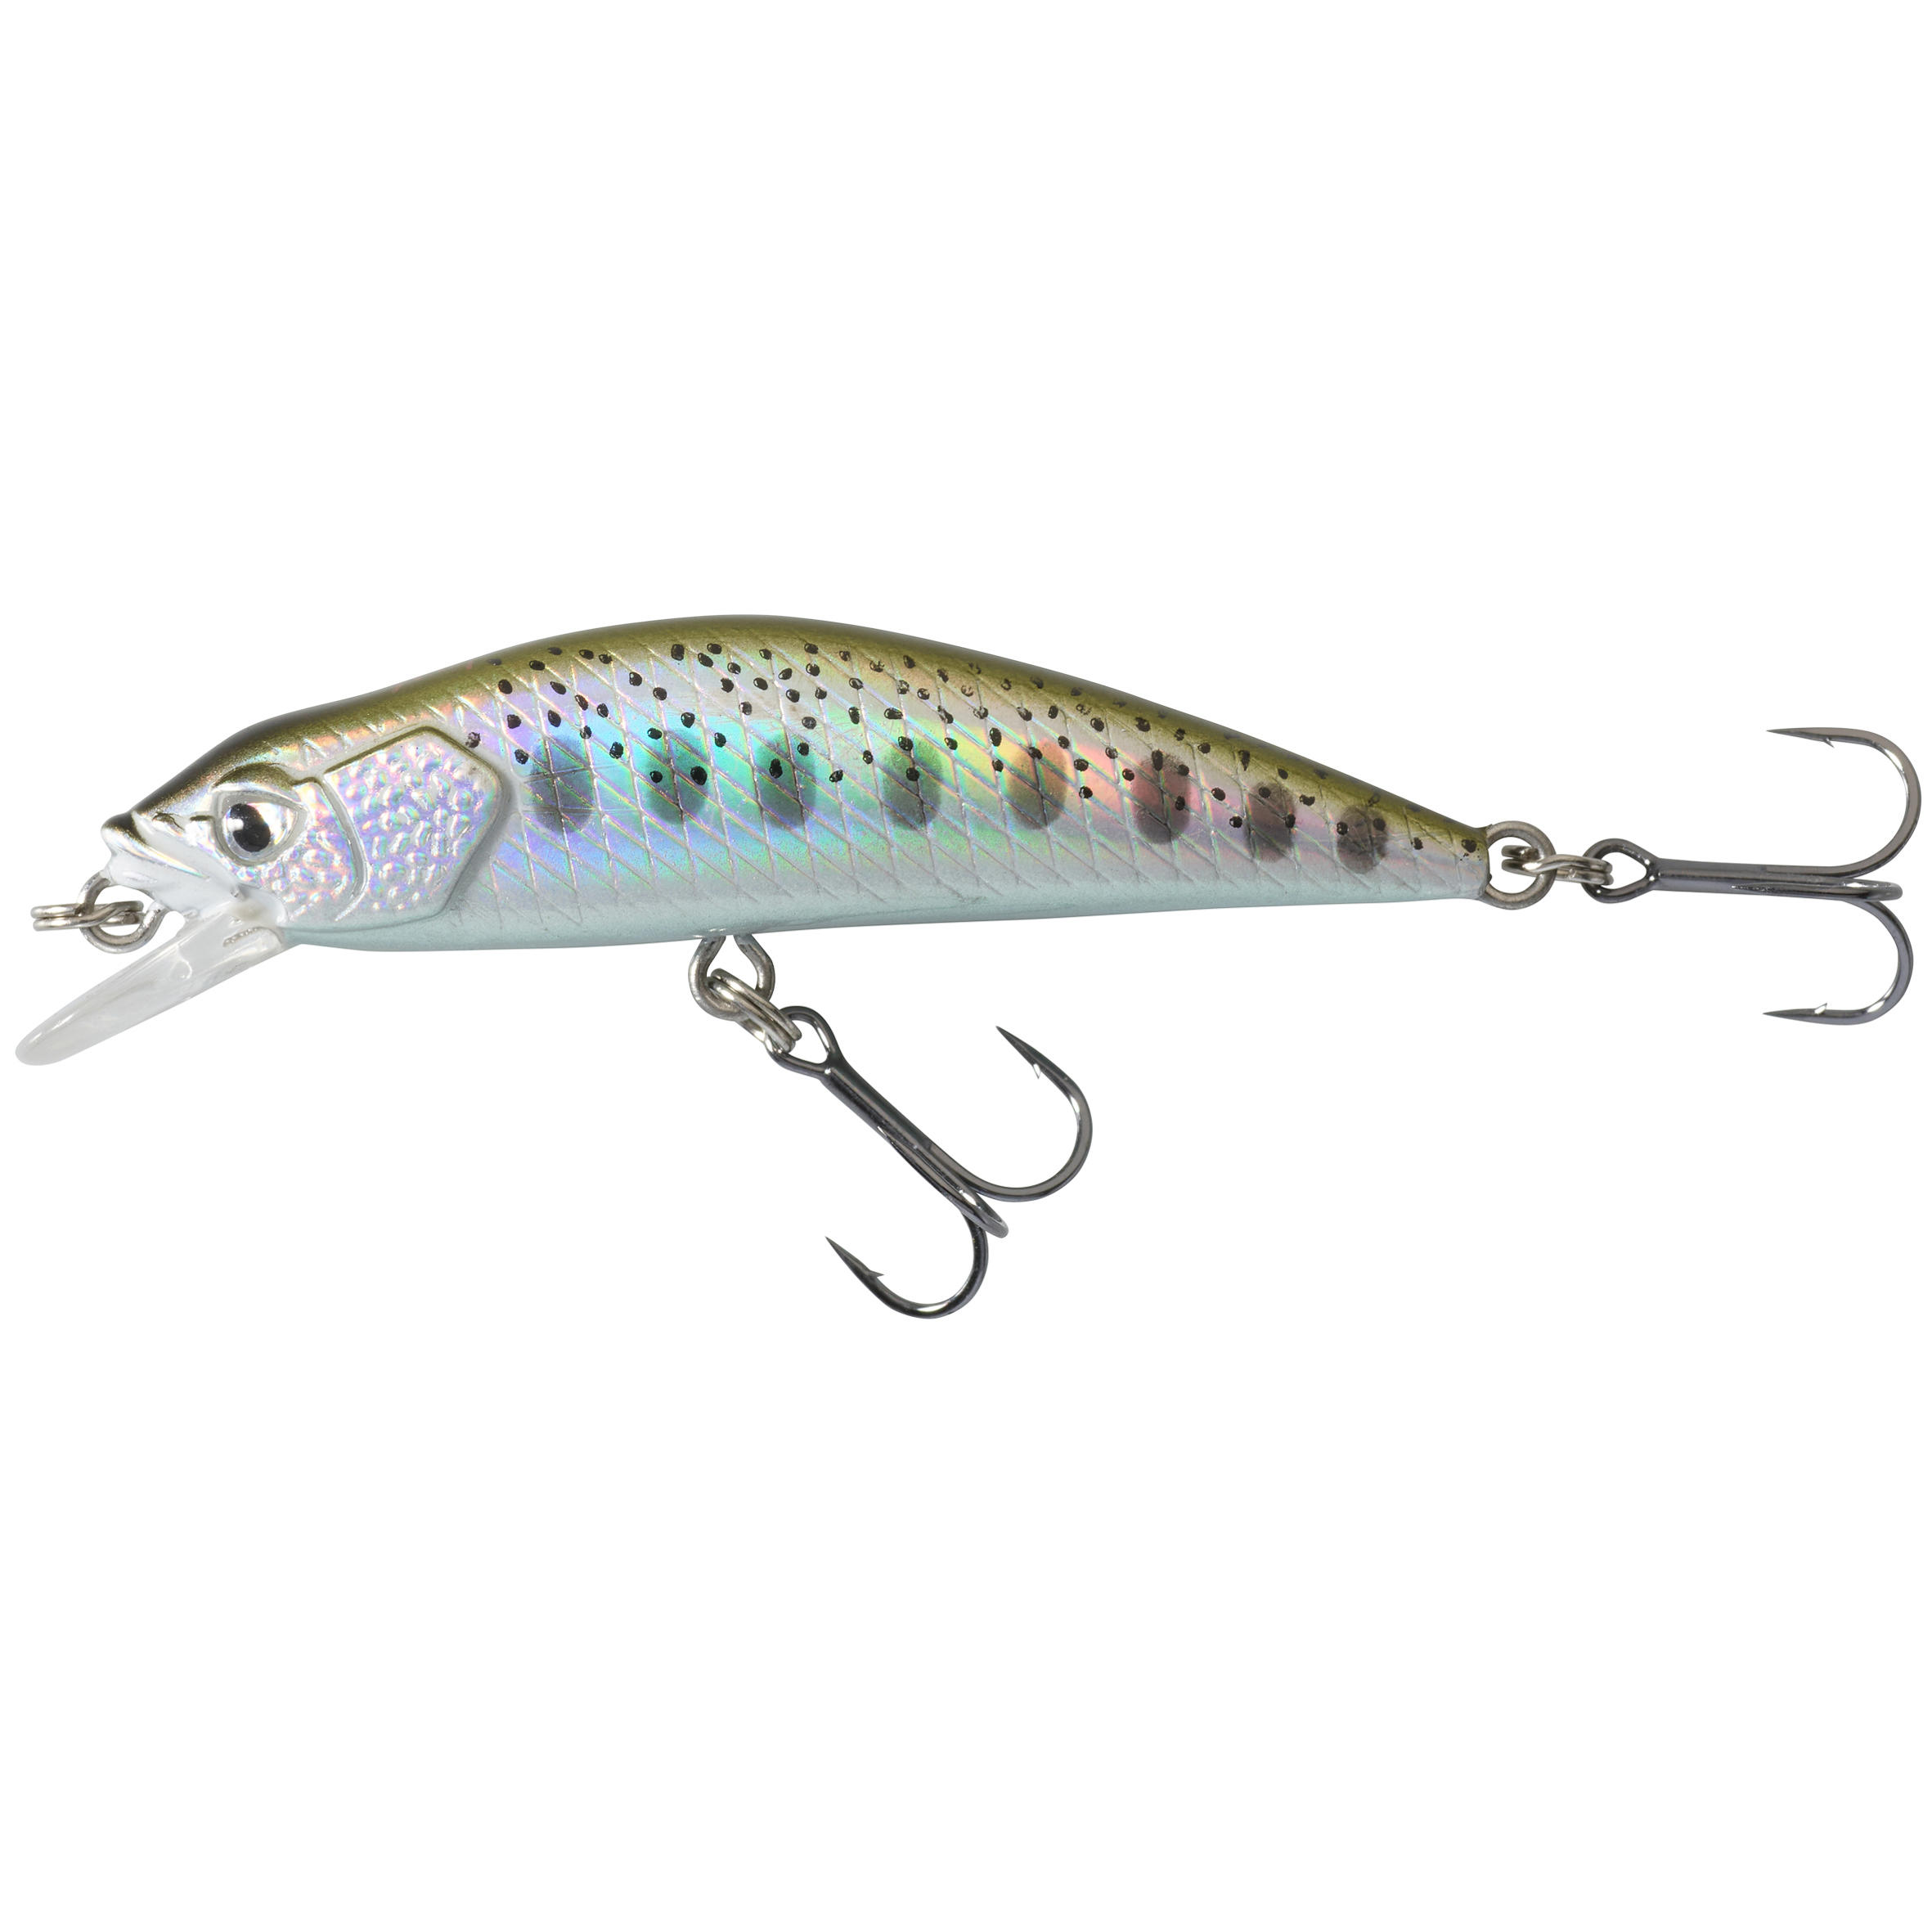 MINNOW HARD LURE FOR TROUT WXM  MNWFS US 50 YAMAME 1/4